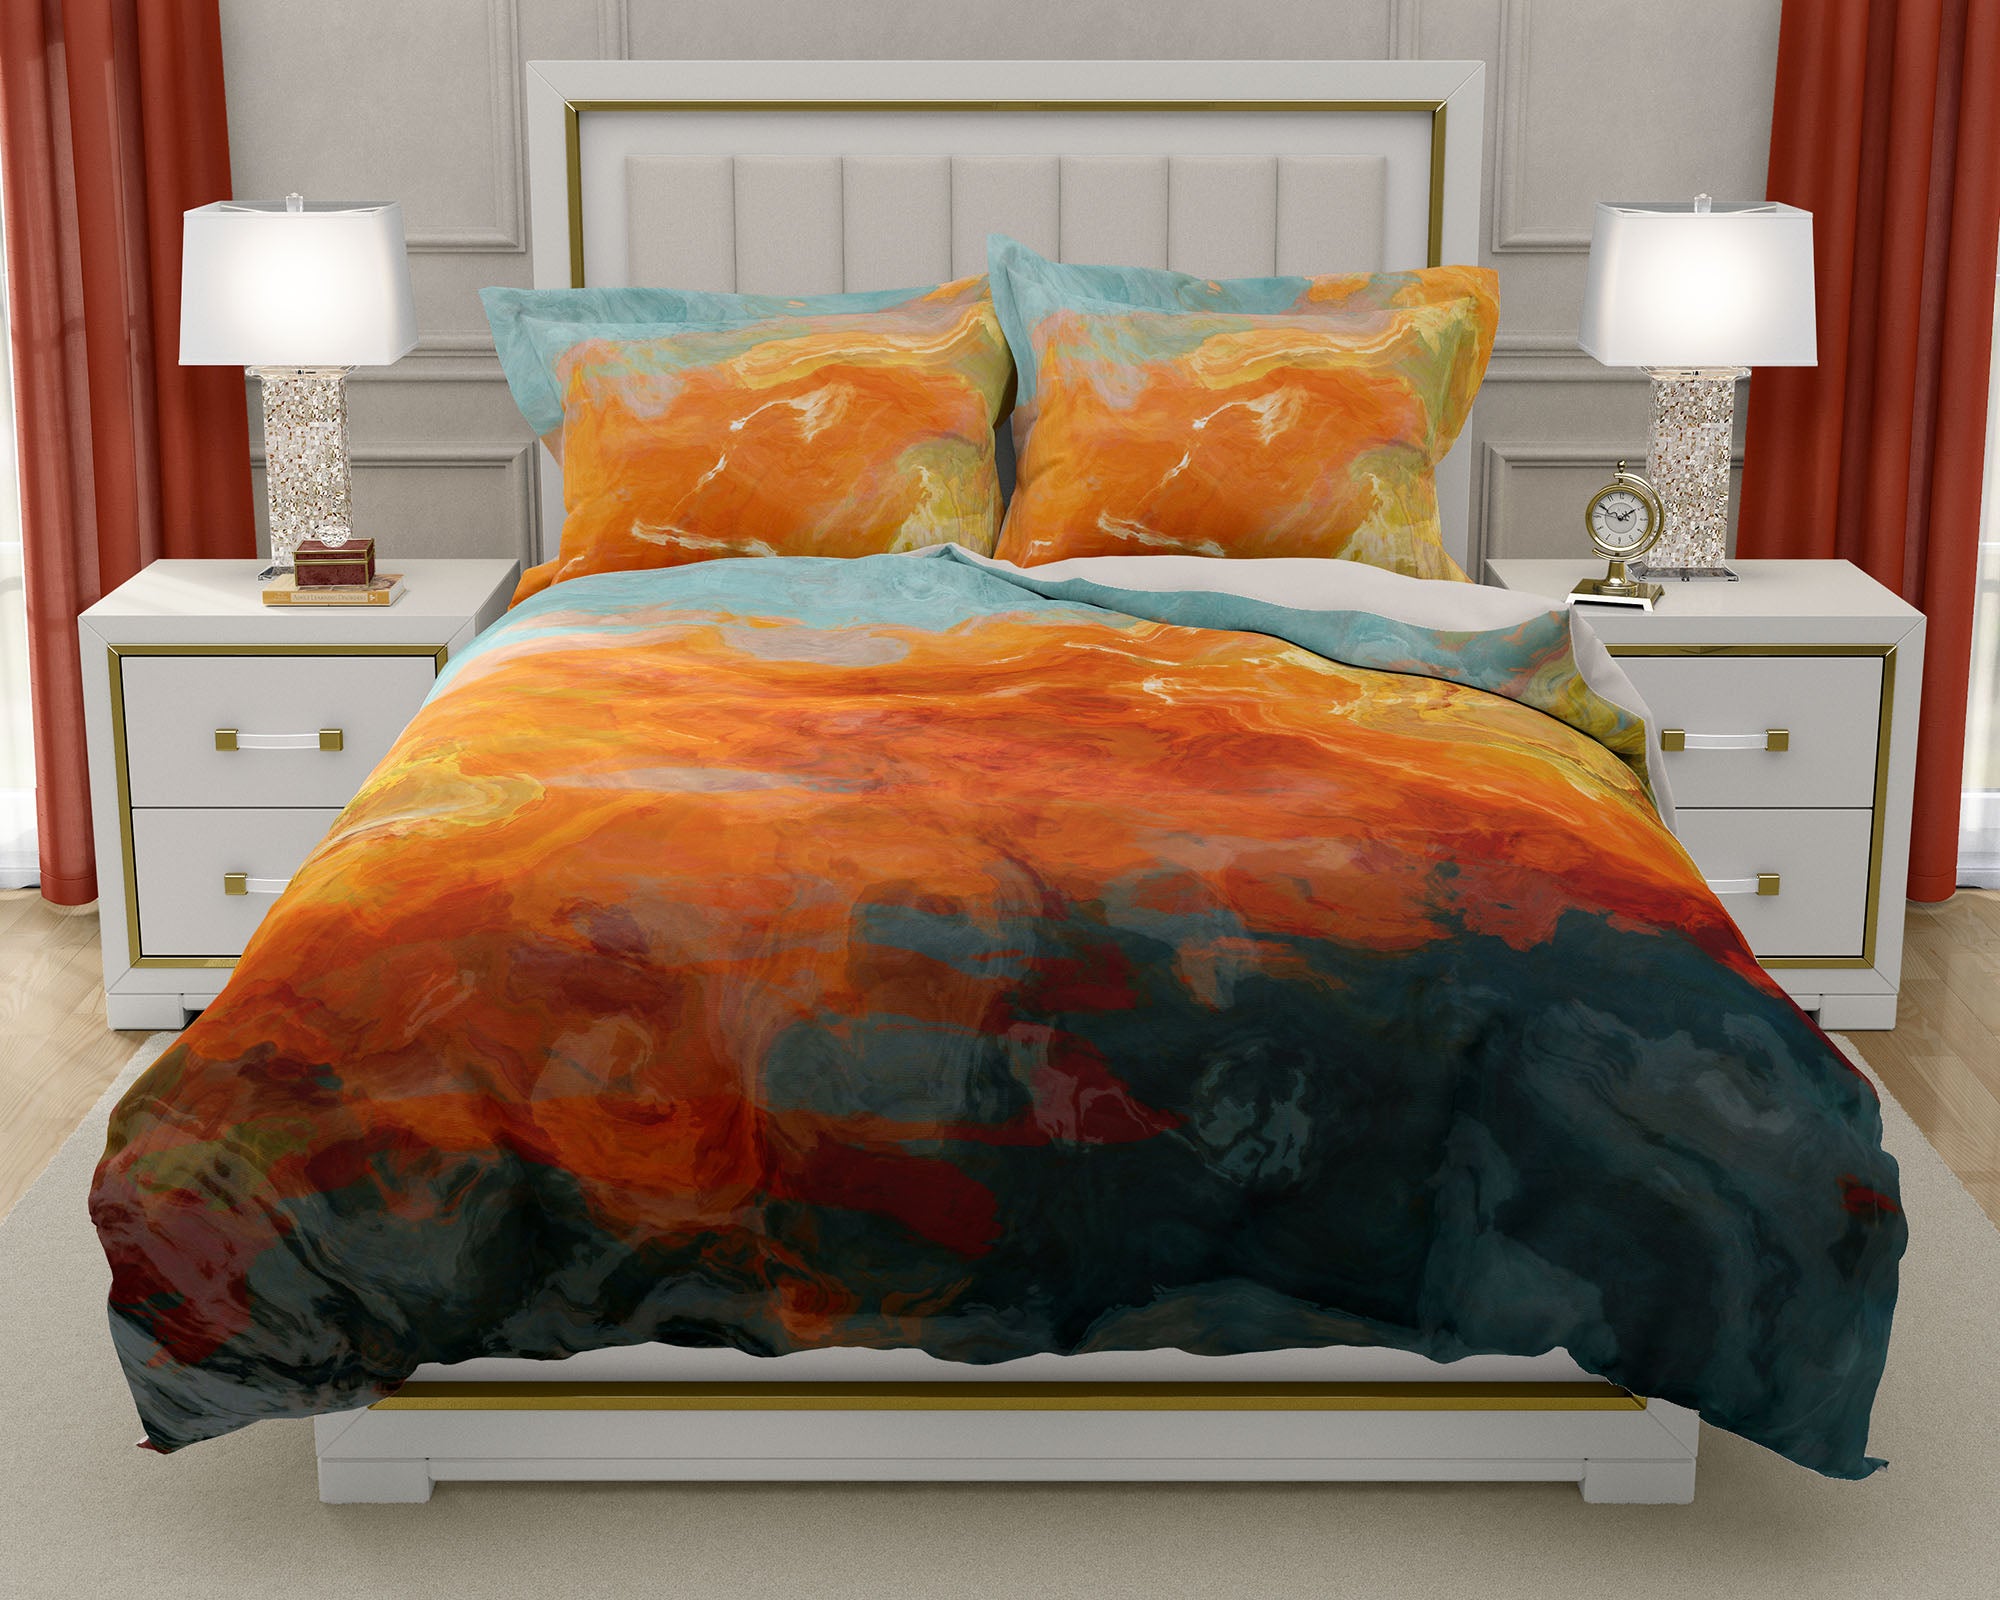 Duvet Cover With Abstract Art King Or Queen In Orange Yellow